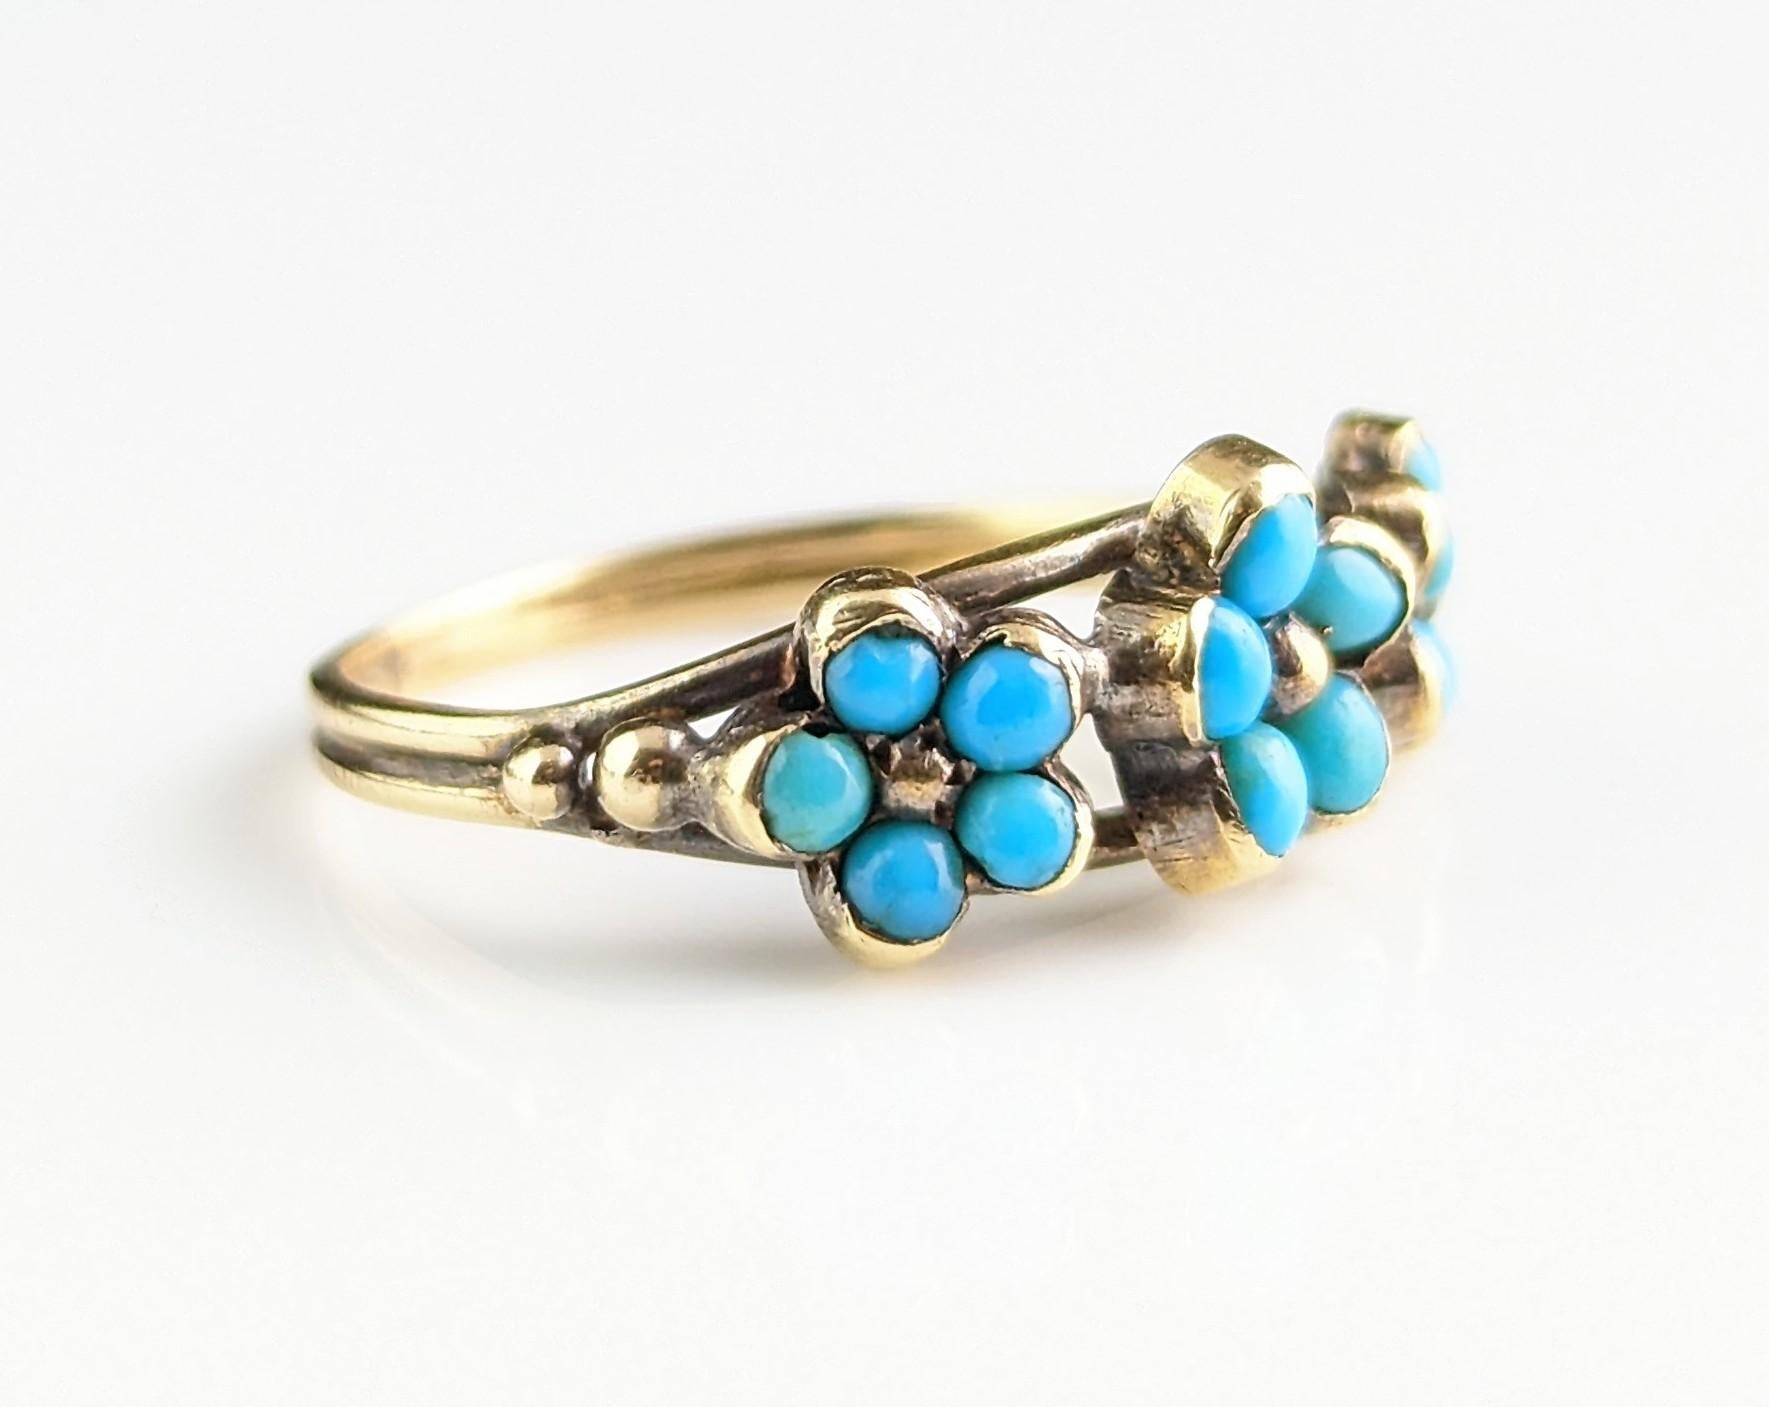 Antique Georgian Triple Flower Ring, Forget Me Not, 18k Gold and Turquoise 11